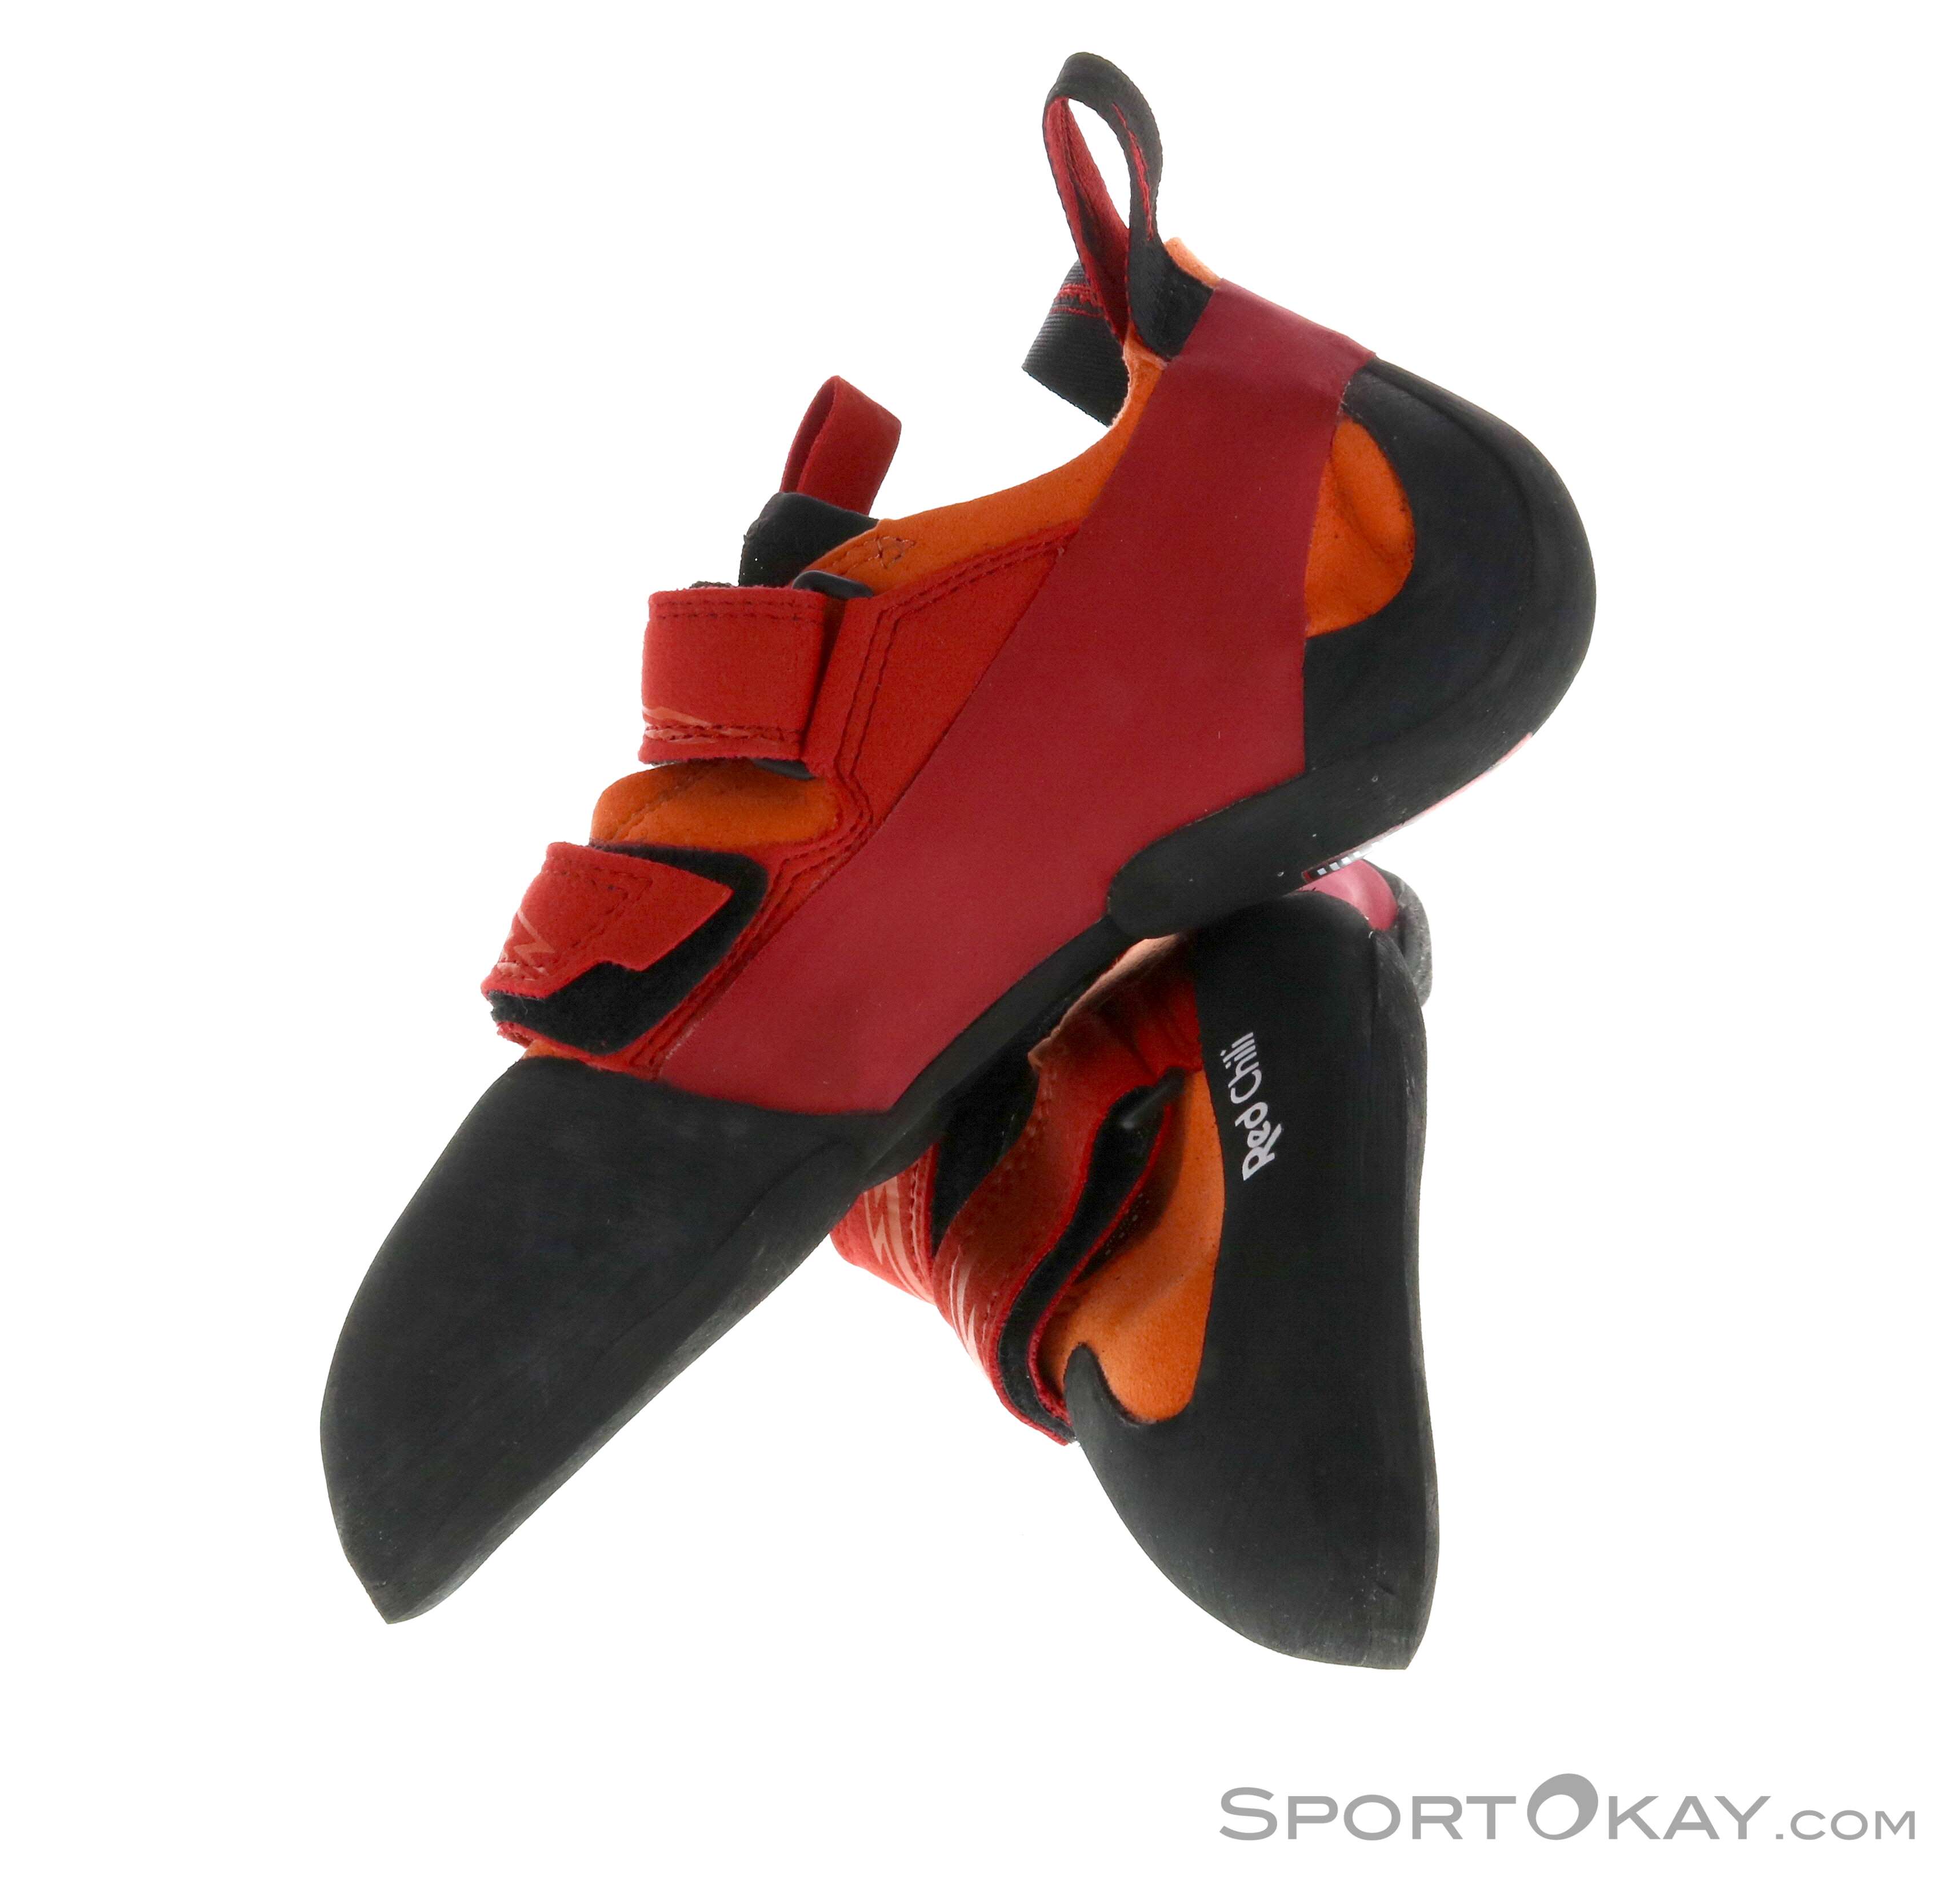 Red Chili Voltage Lace LV - Climbing shoes, Buy online